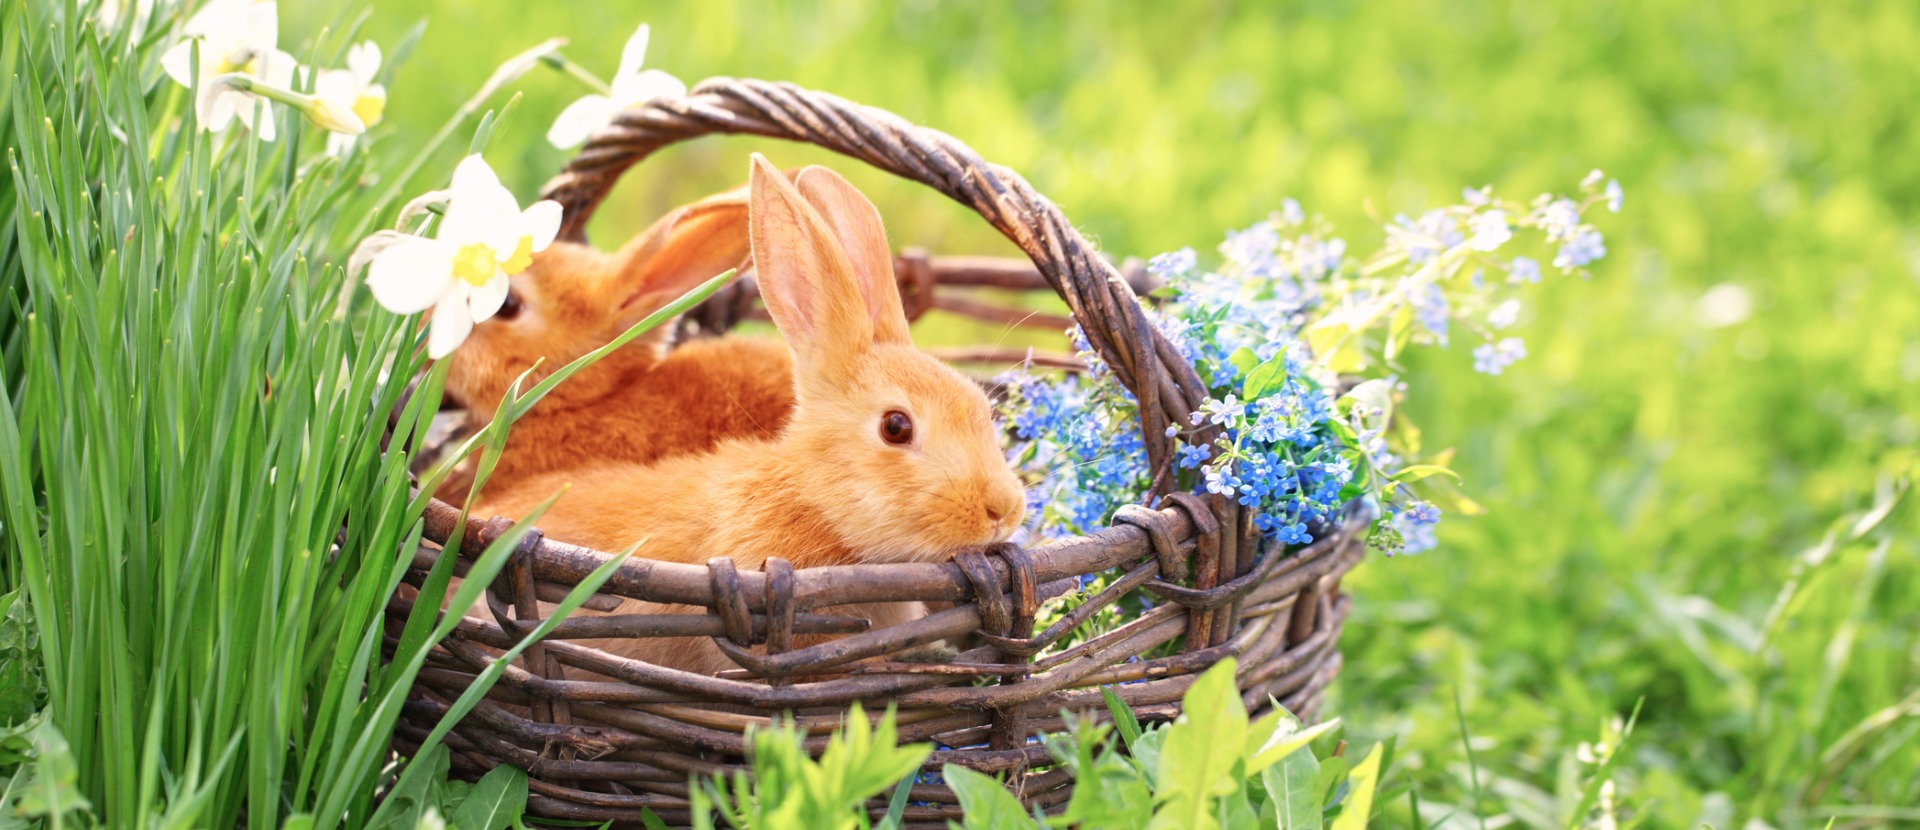 Two bunnies in a Basket